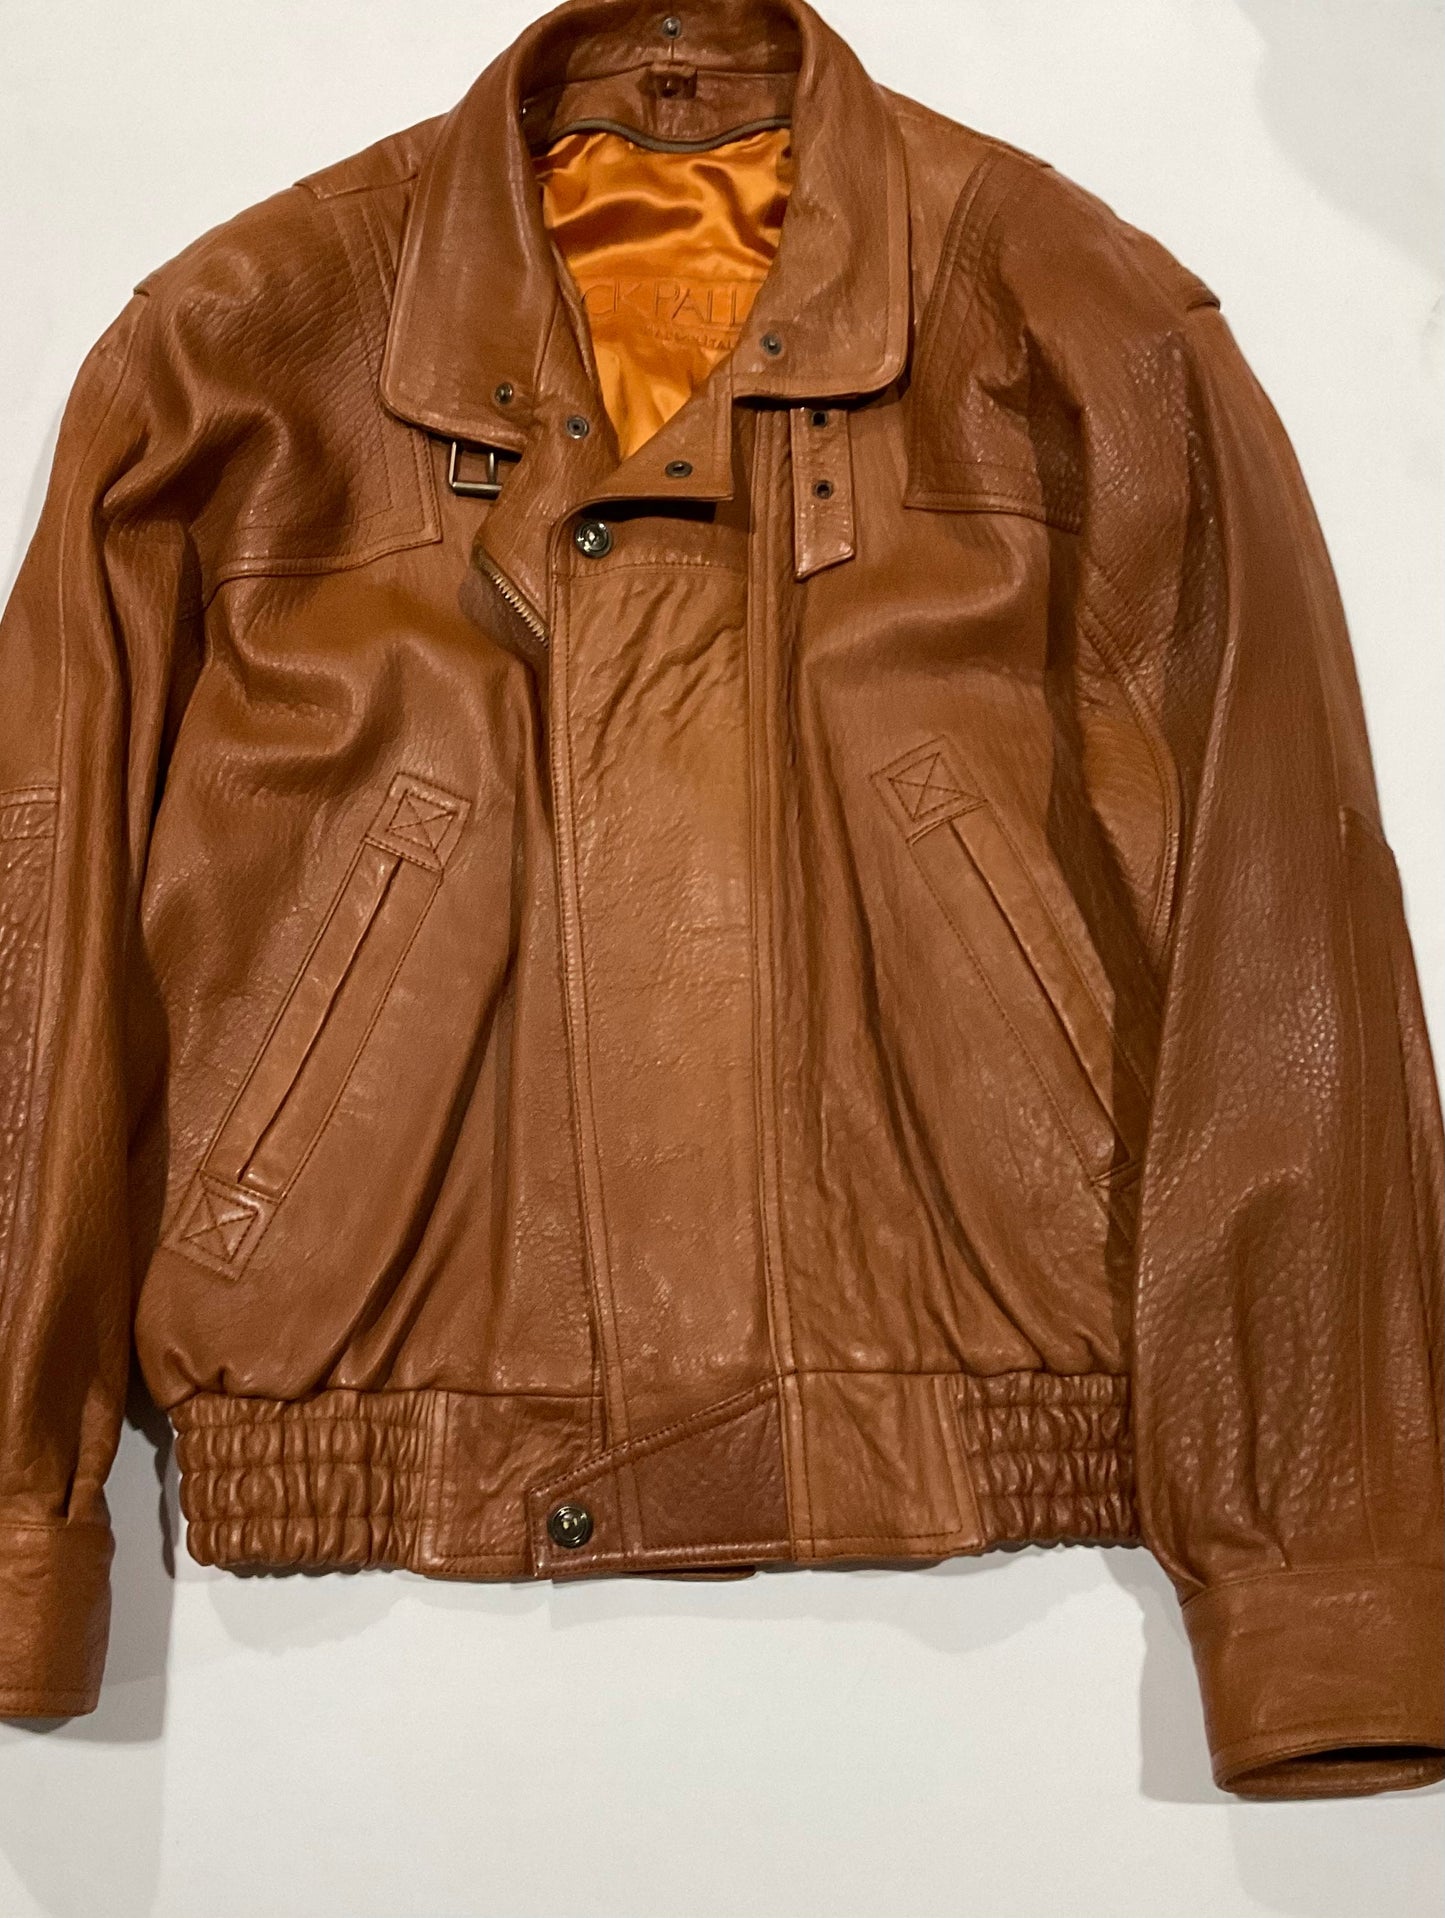 R P LEATHER JACKET / BROWN RUST / MEDIUM / REMOVABLE COLLAR / MADE IN ITALY